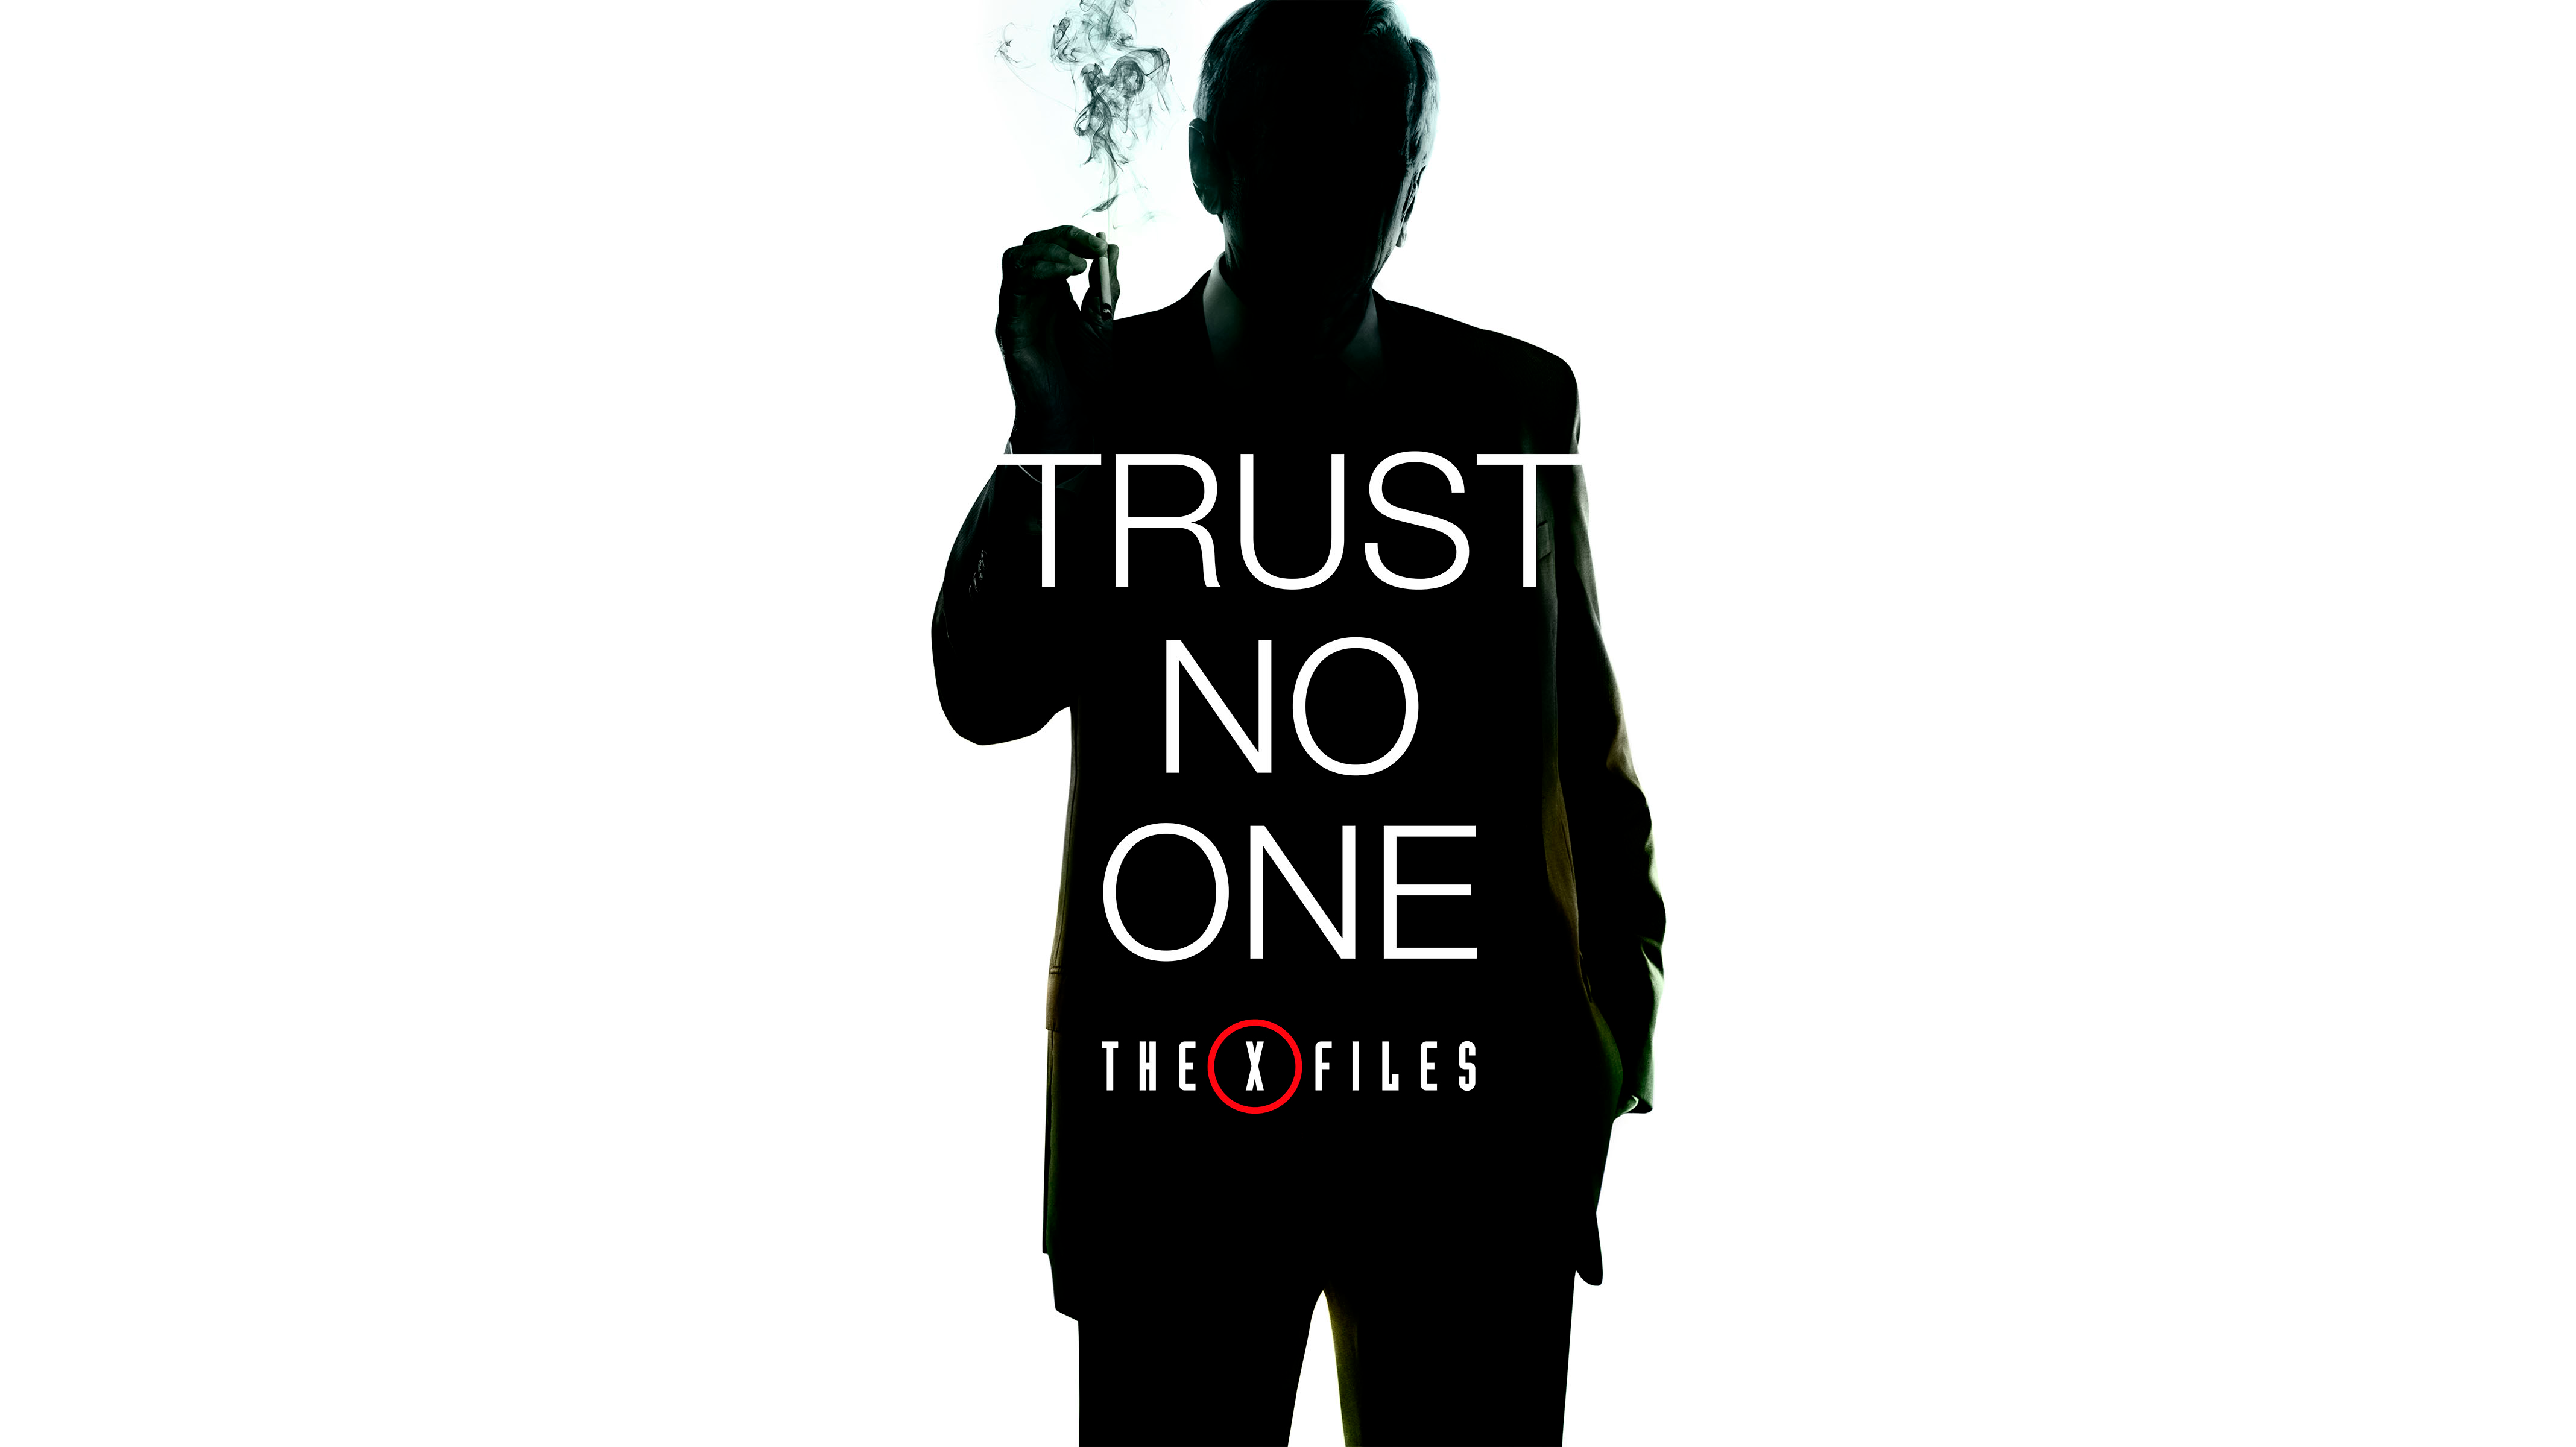 X Files Wallpaper Image Collection Of Ntx337